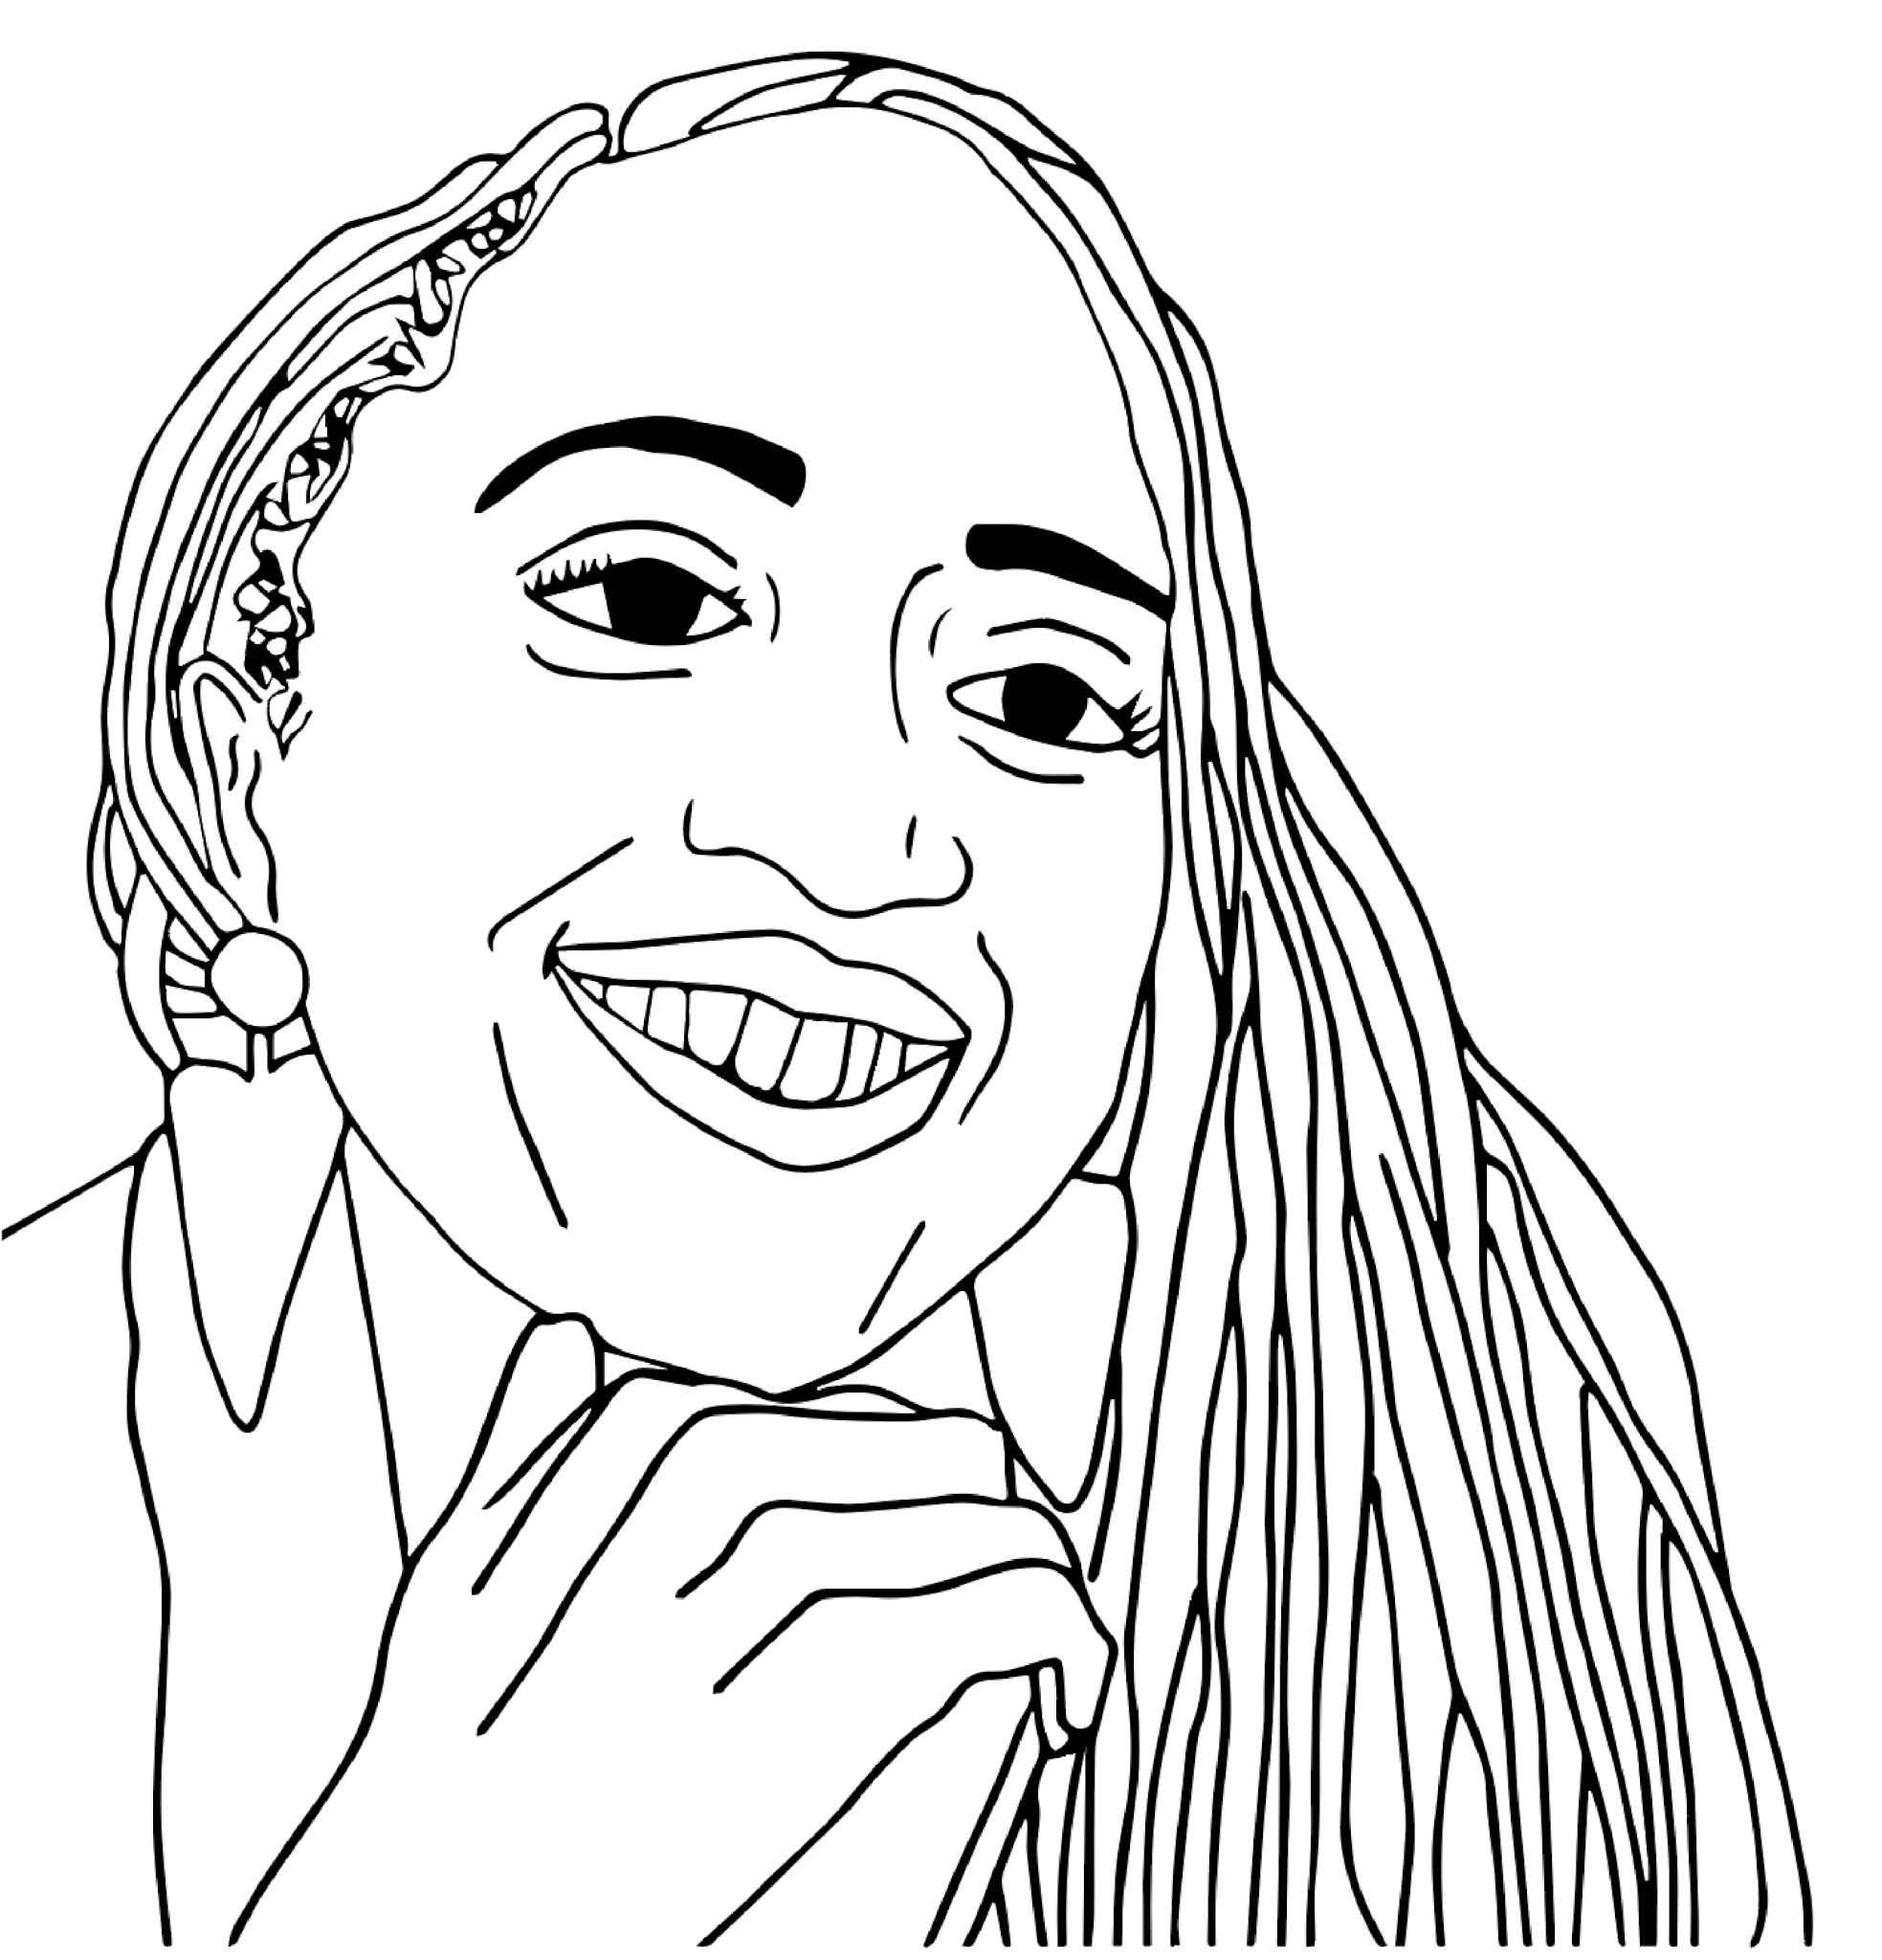 A black and white drawing of Jacquinn Sinclair smiling at the viewer. Her chin rests on her knuckles and her hair coils over the right side of her face.